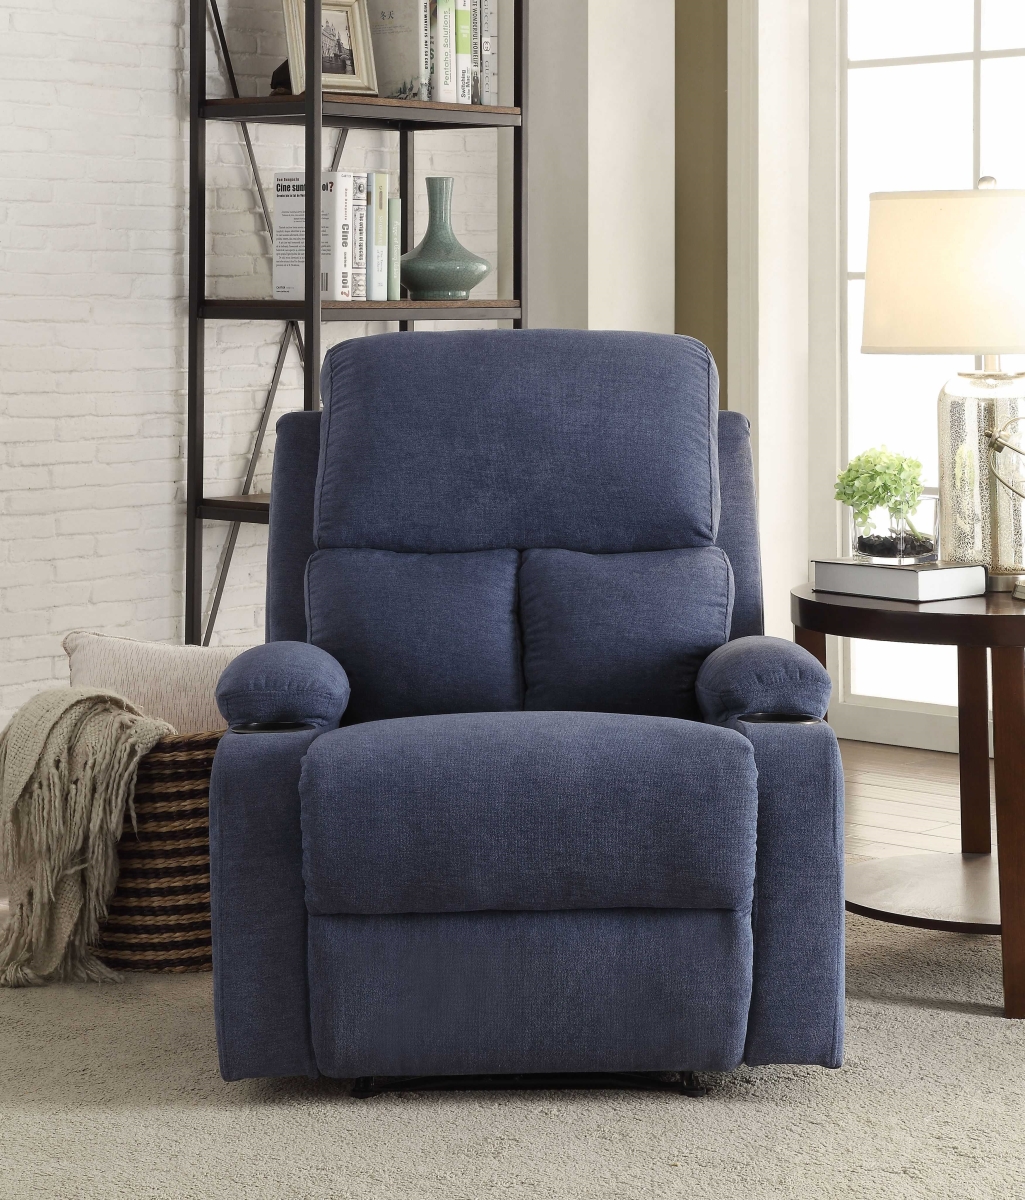 Grilltown 39 x 32 x 37 in. Linen Fabric & Wood Frame Recliner - Chocolate